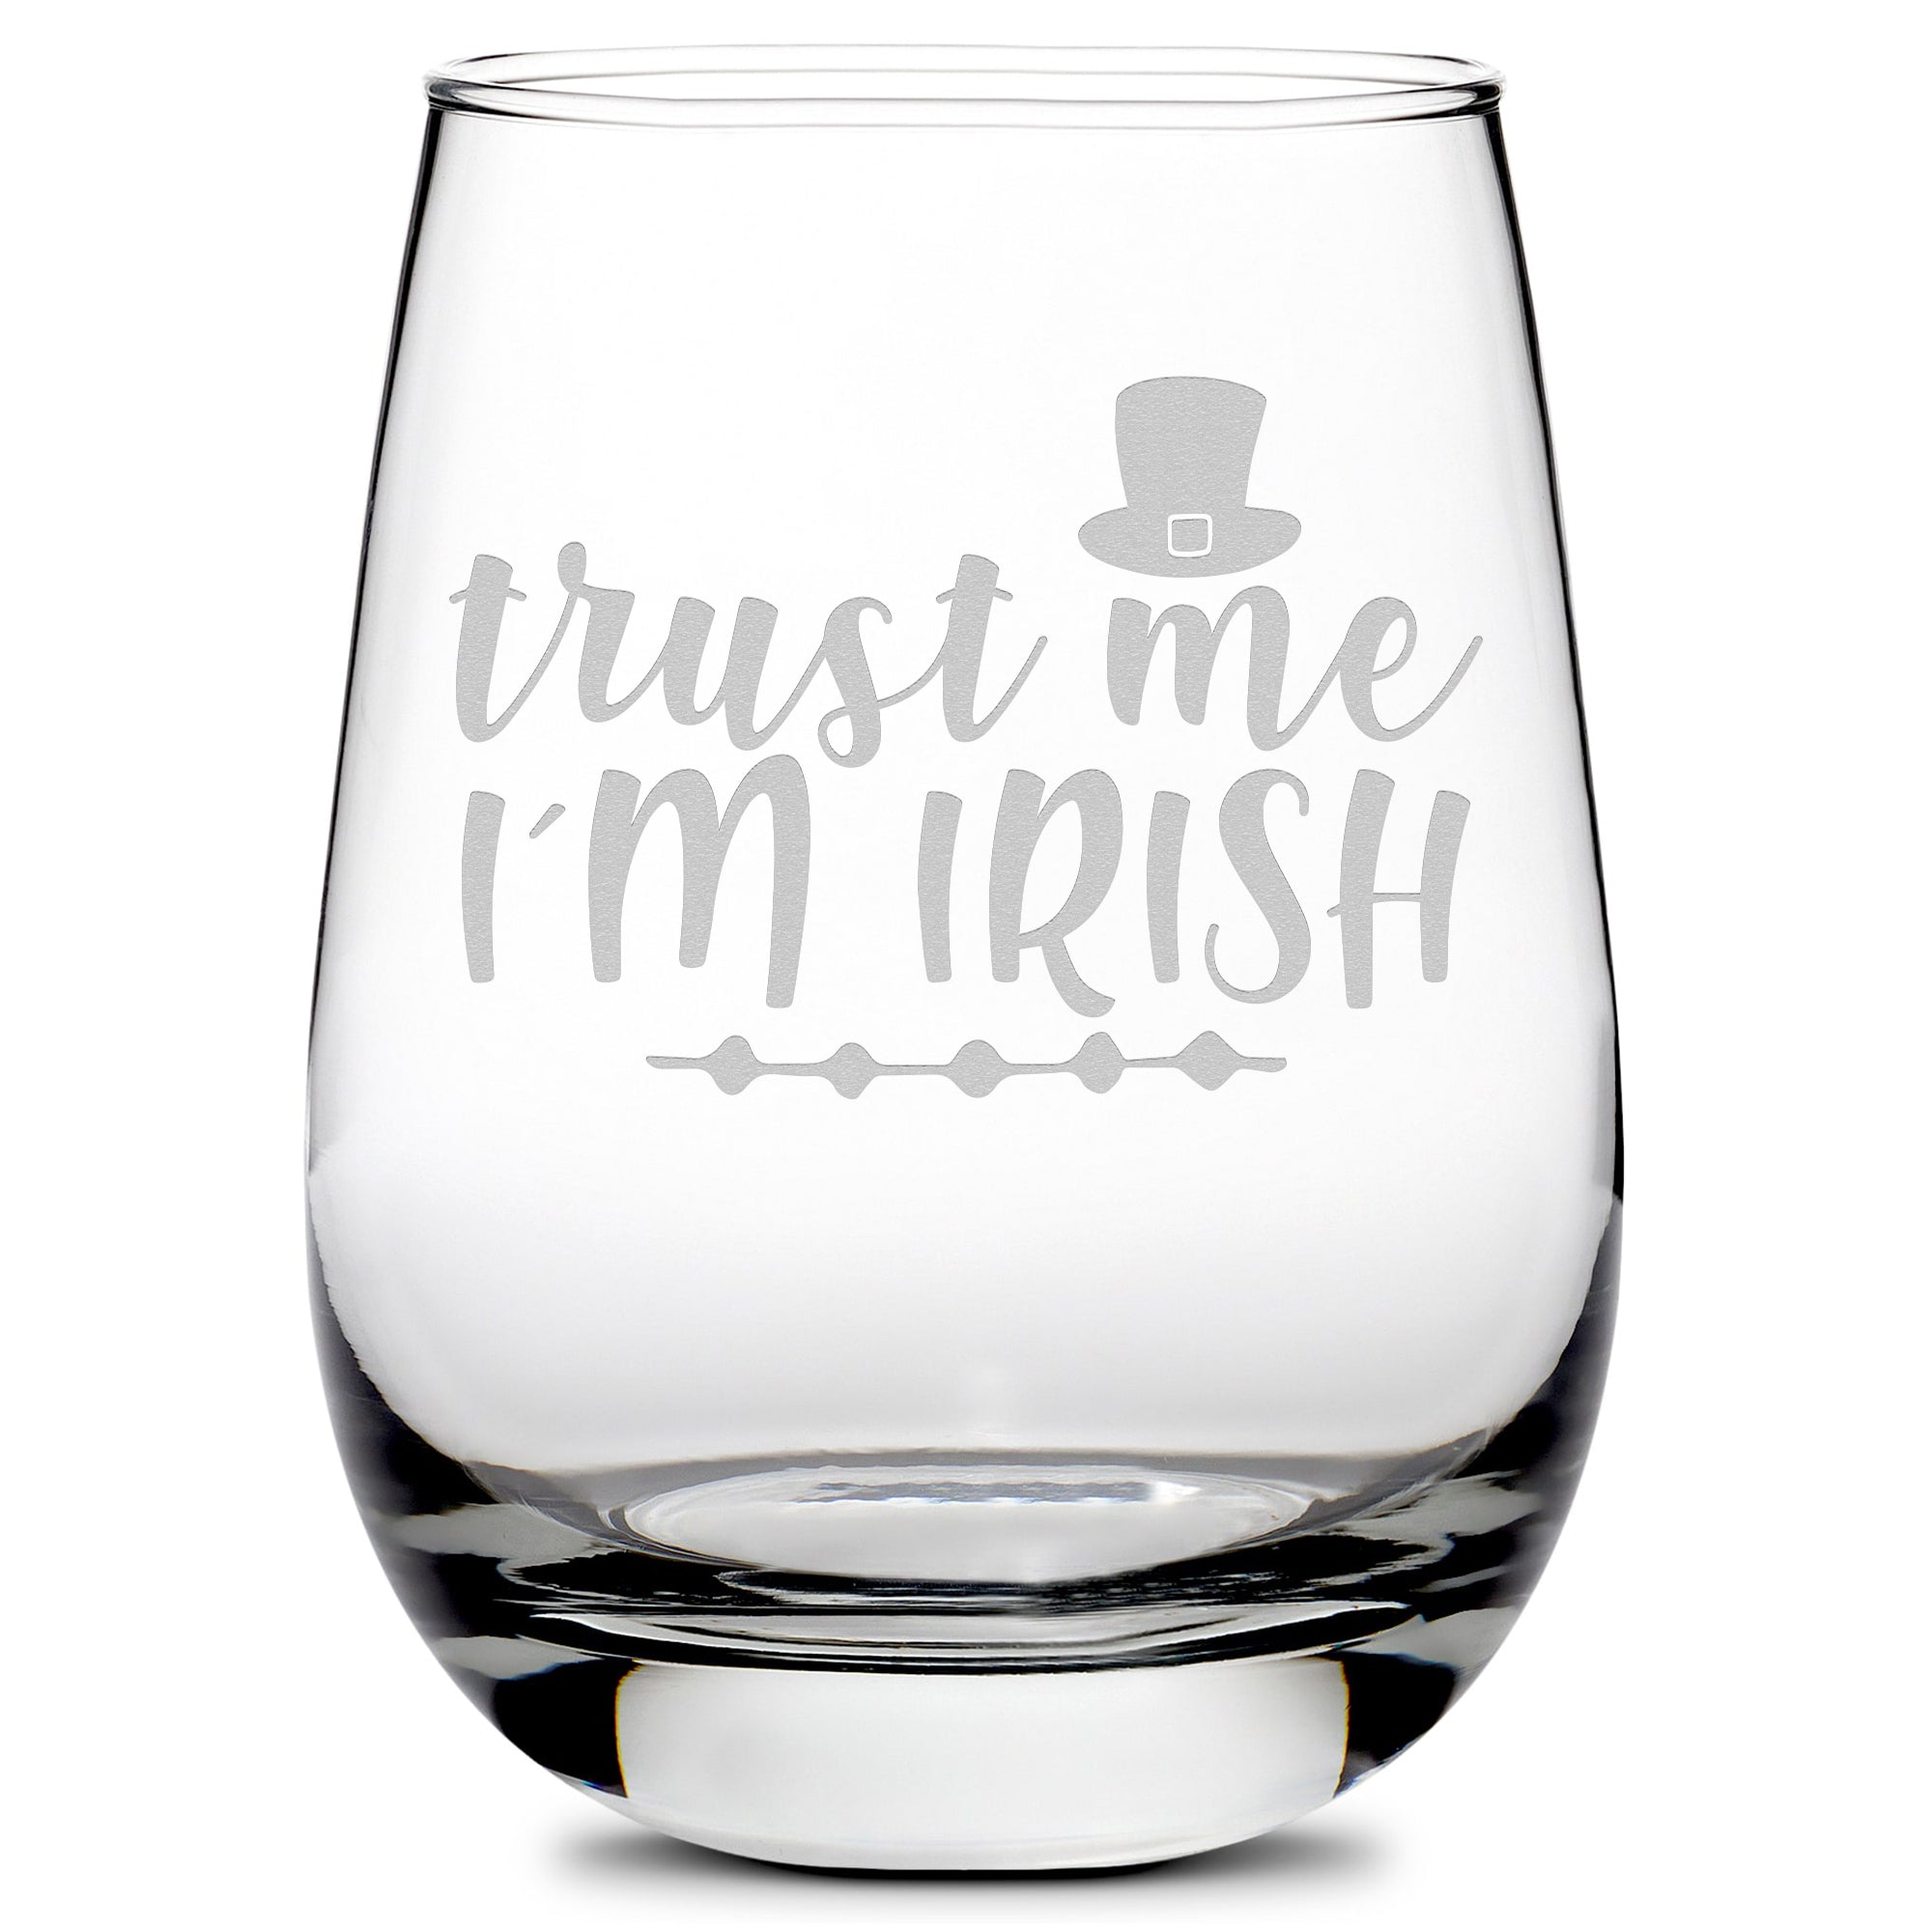 Premium Stemless Wine Glass, Trust Me I'm Irish, 16oz, Laser Etched or Hand Etched